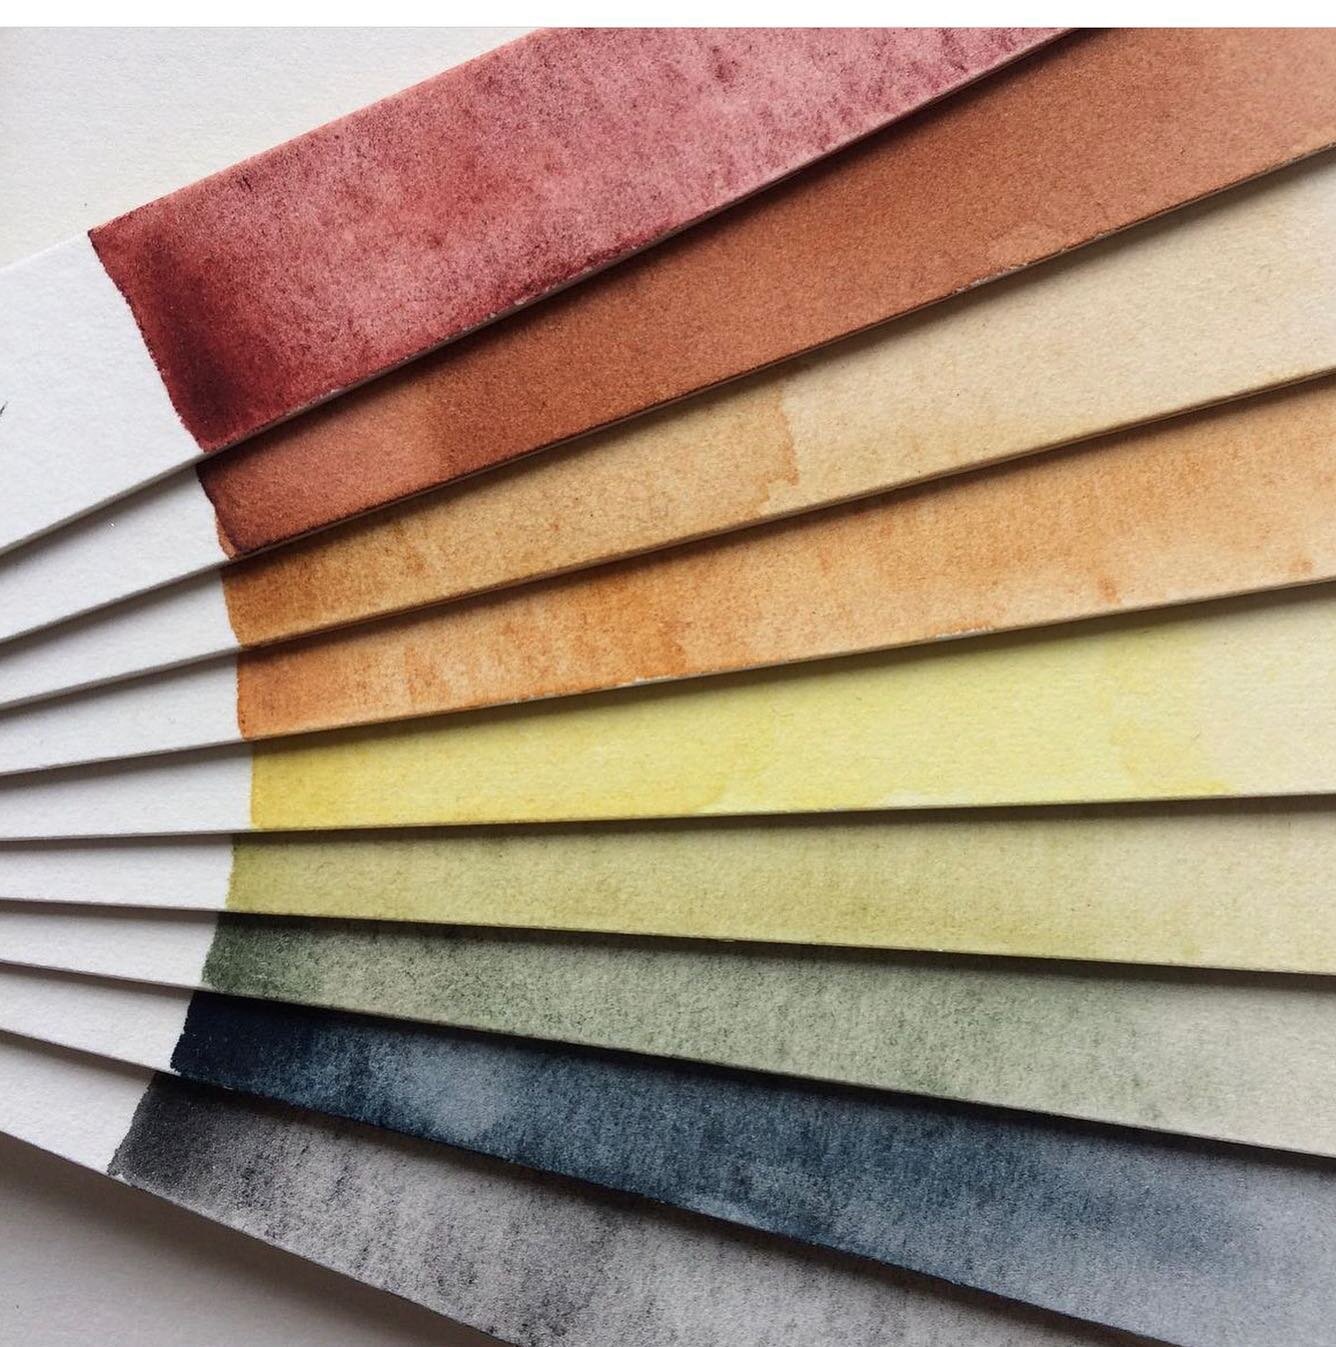 Loveliest of color swatch cards by Studio Slow Lane ▫️▫️

All natural watercolor pigments ▫️ A work of art in and of itself ▫️🎨

#slowliving #naturalcolor #plantbasedcolor #swatchcard #naturalpigment #austininteriordesign #austininteriorsdesigner #i